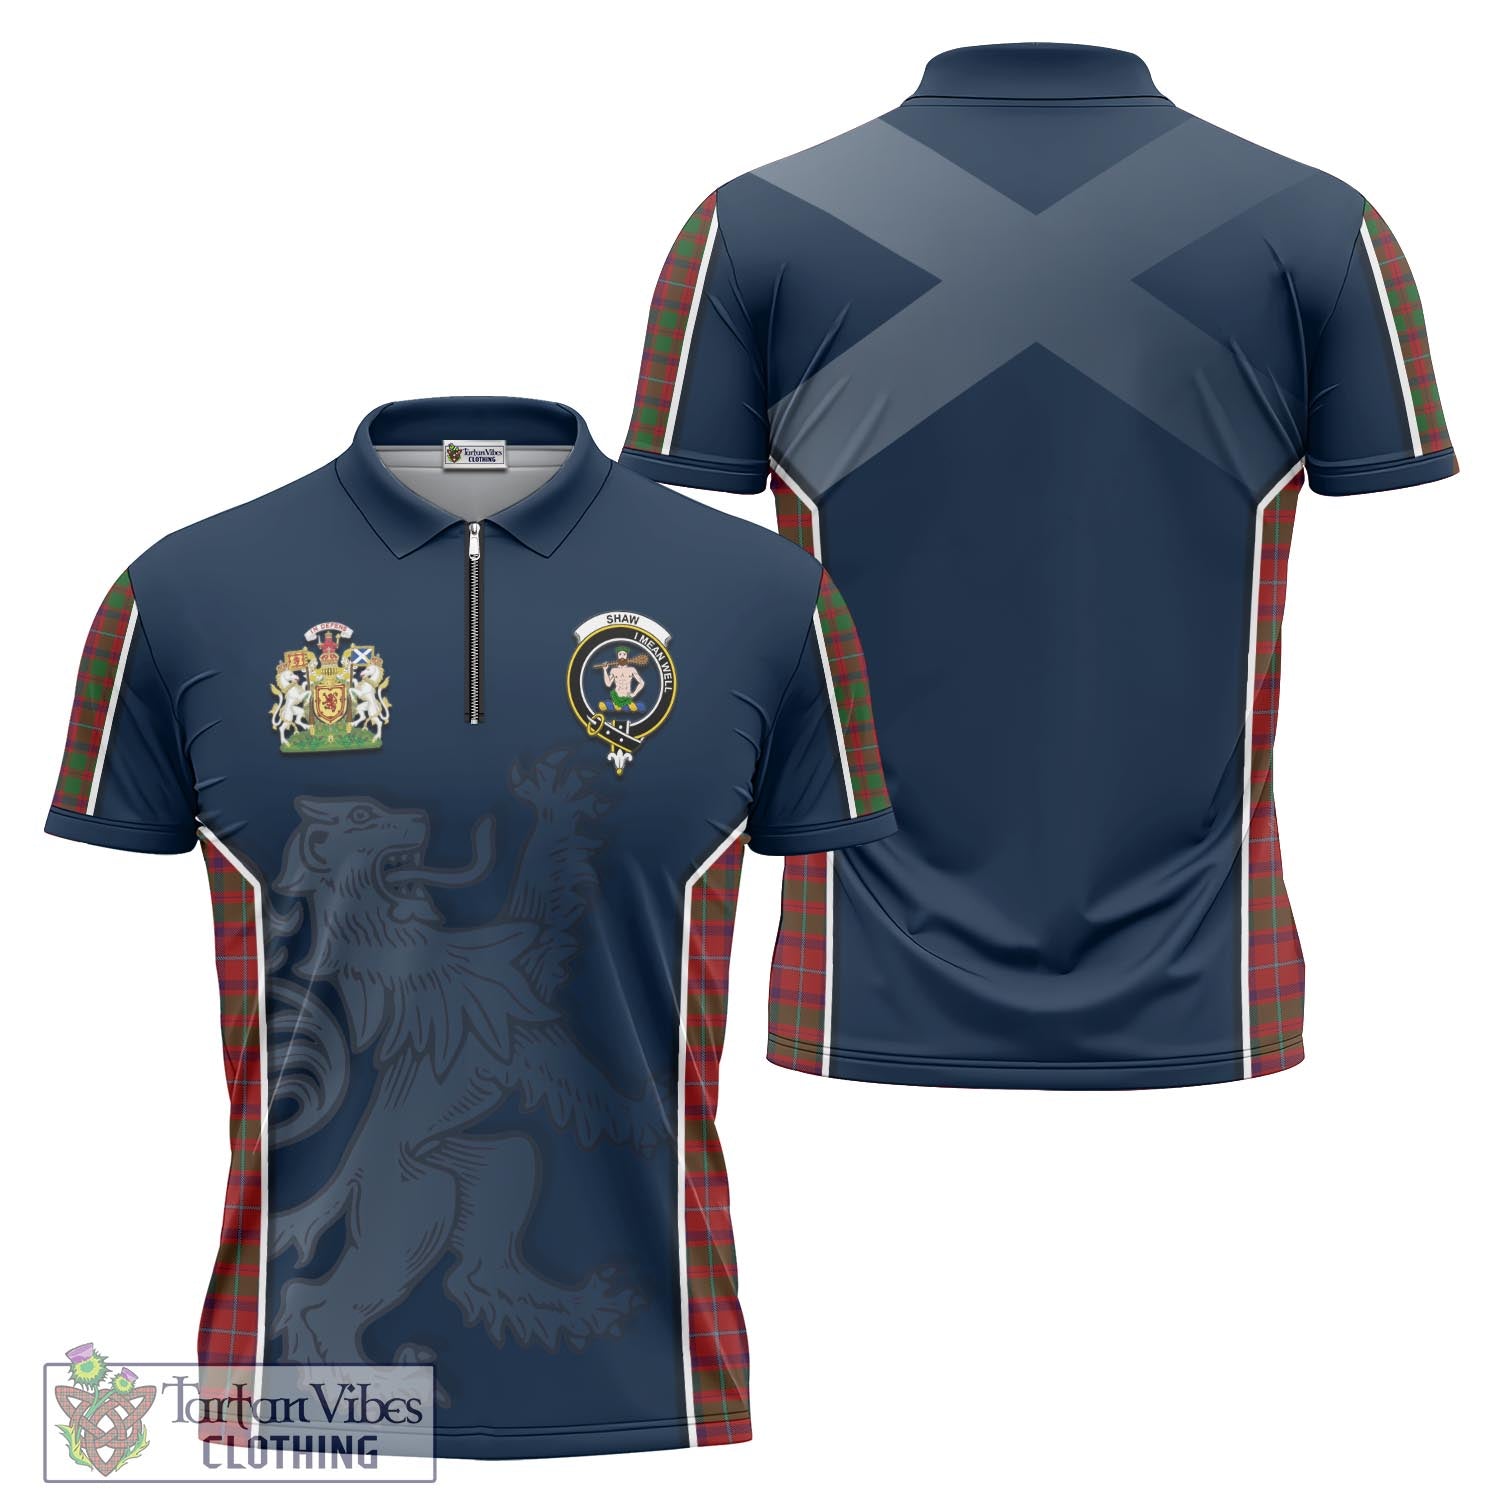 Tartan Vibes Clothing Shaw of Tordarroch Red Dress Tartan Zipper Polo Shirt with Family Crest and Lion Rampant Vibes Sport Style